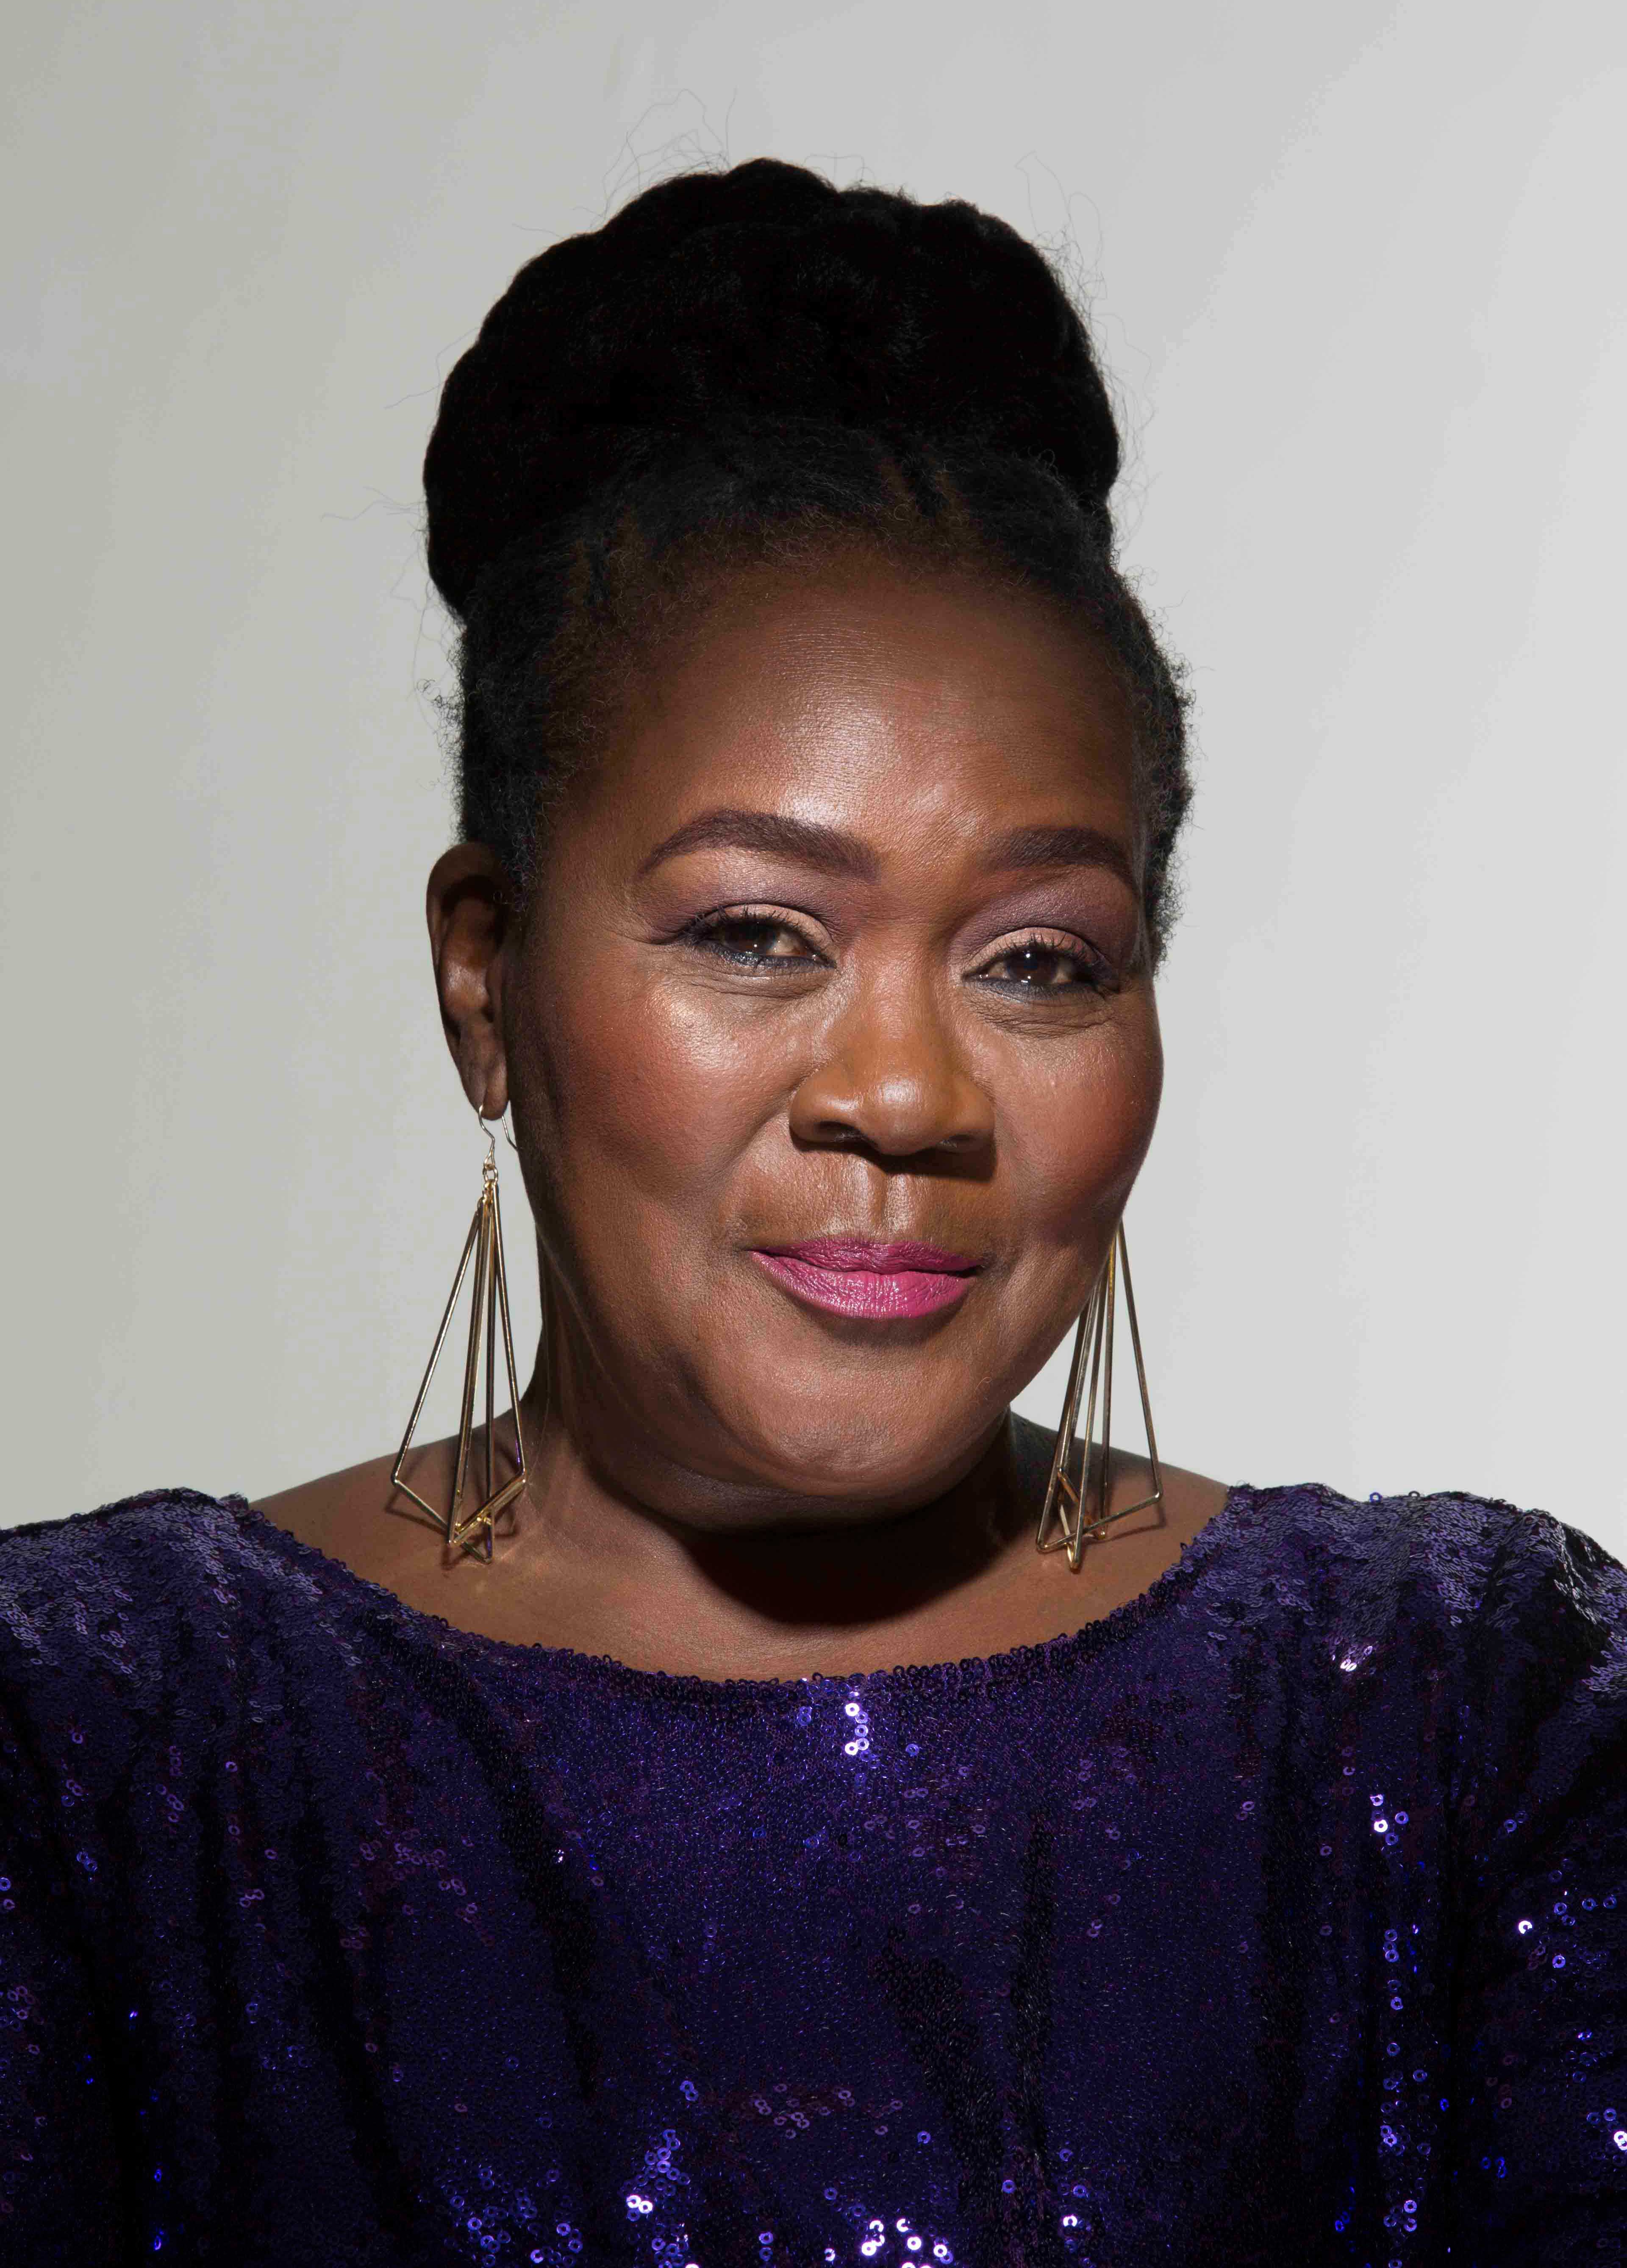 #WCW Our Woman Crush this Wednesday is our cover star Connie Chiume